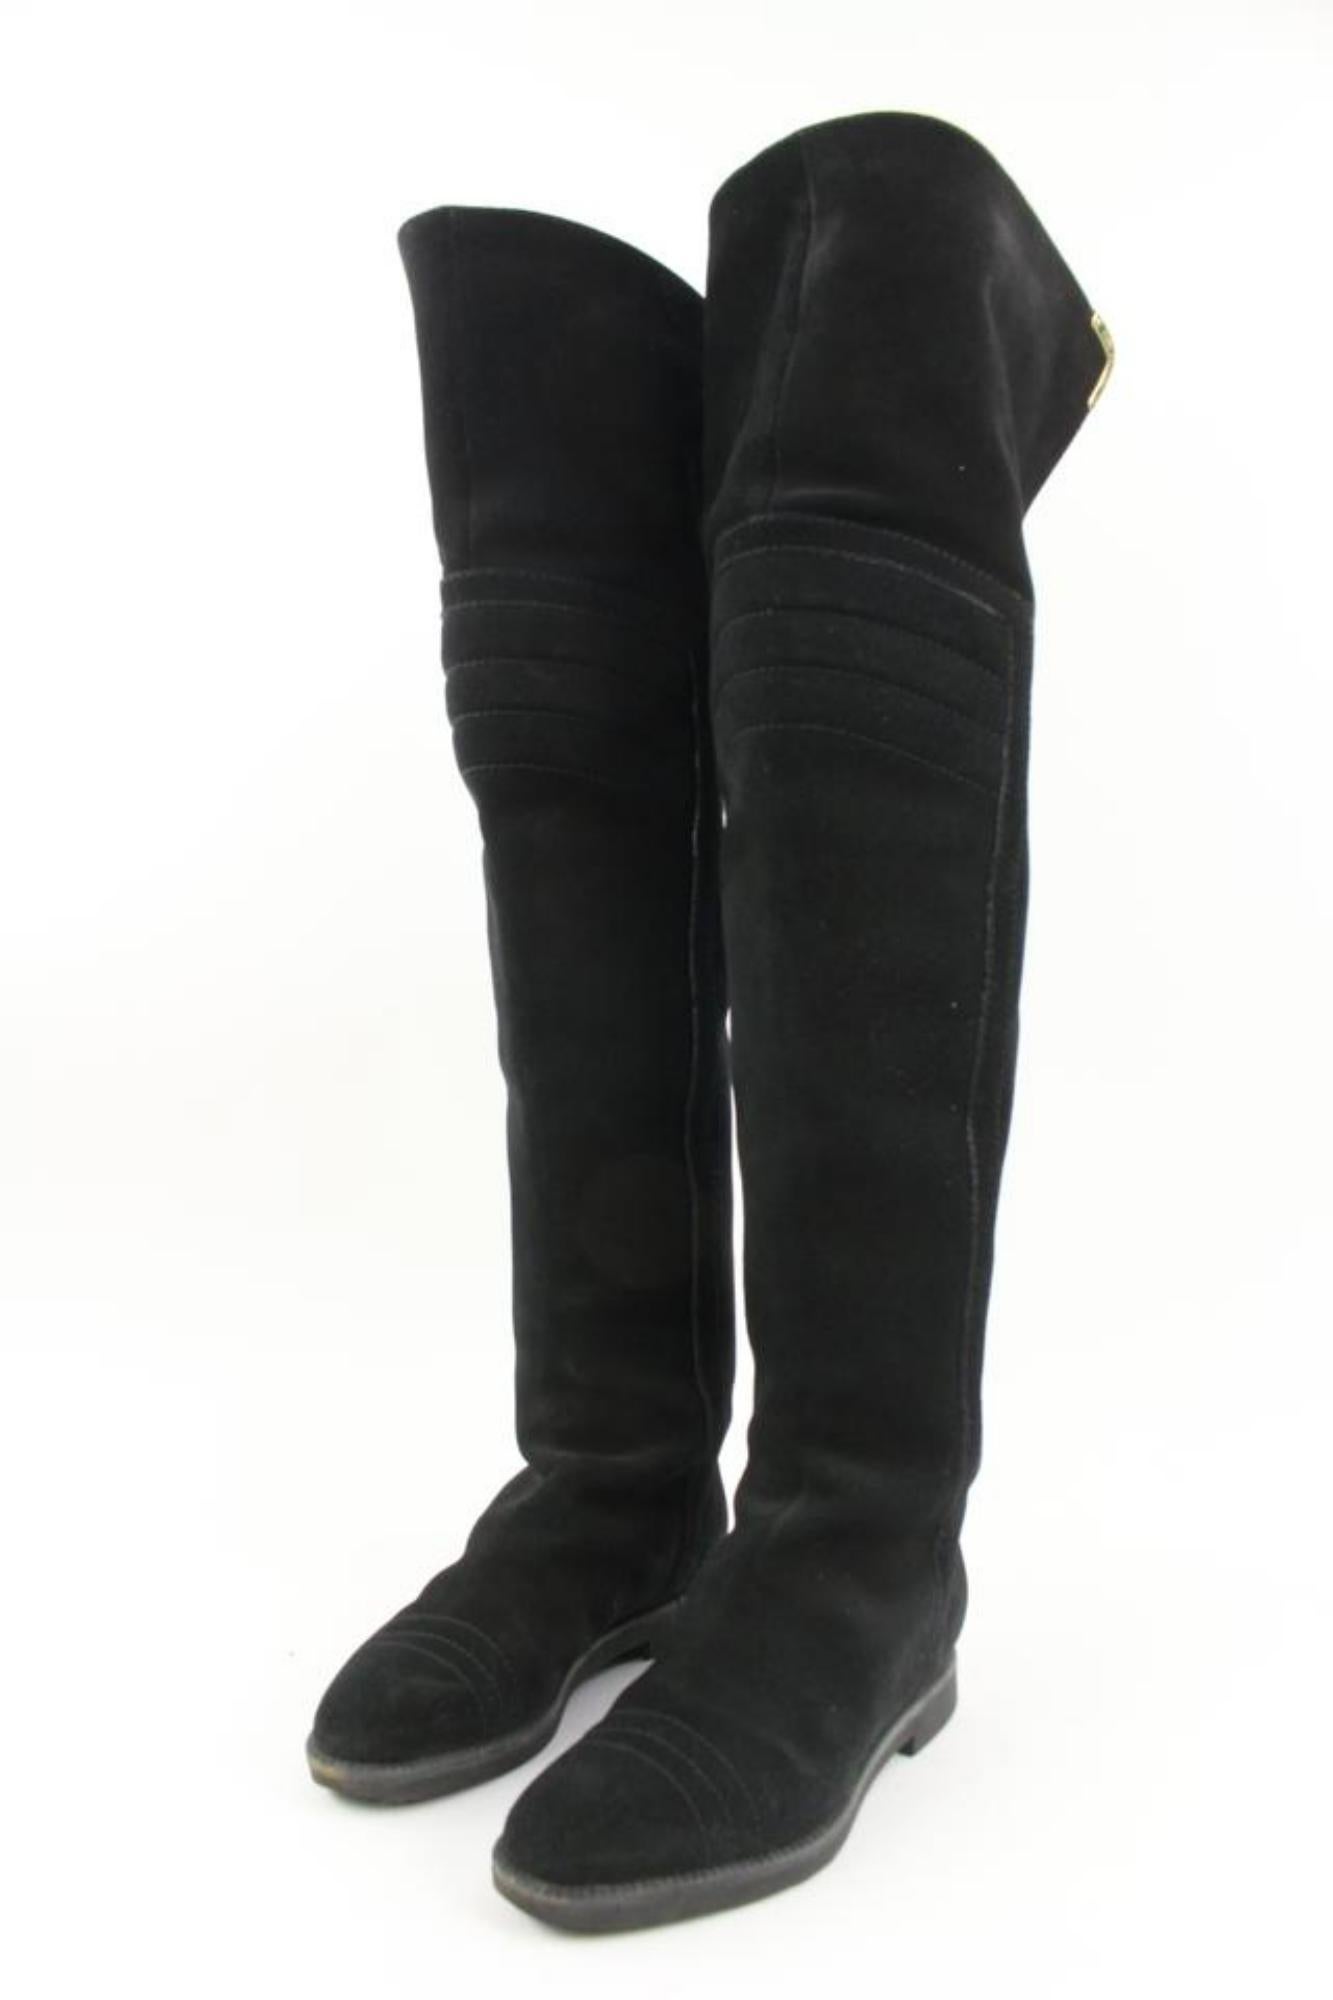 Louis Vuitton Size 35 Rare Black Suede Over the Knee Boots Moto Motorcycle 64lv32s
Date Code/Serial Number: MA 0161
Made In: Italy
Measurements: Length:  9.5